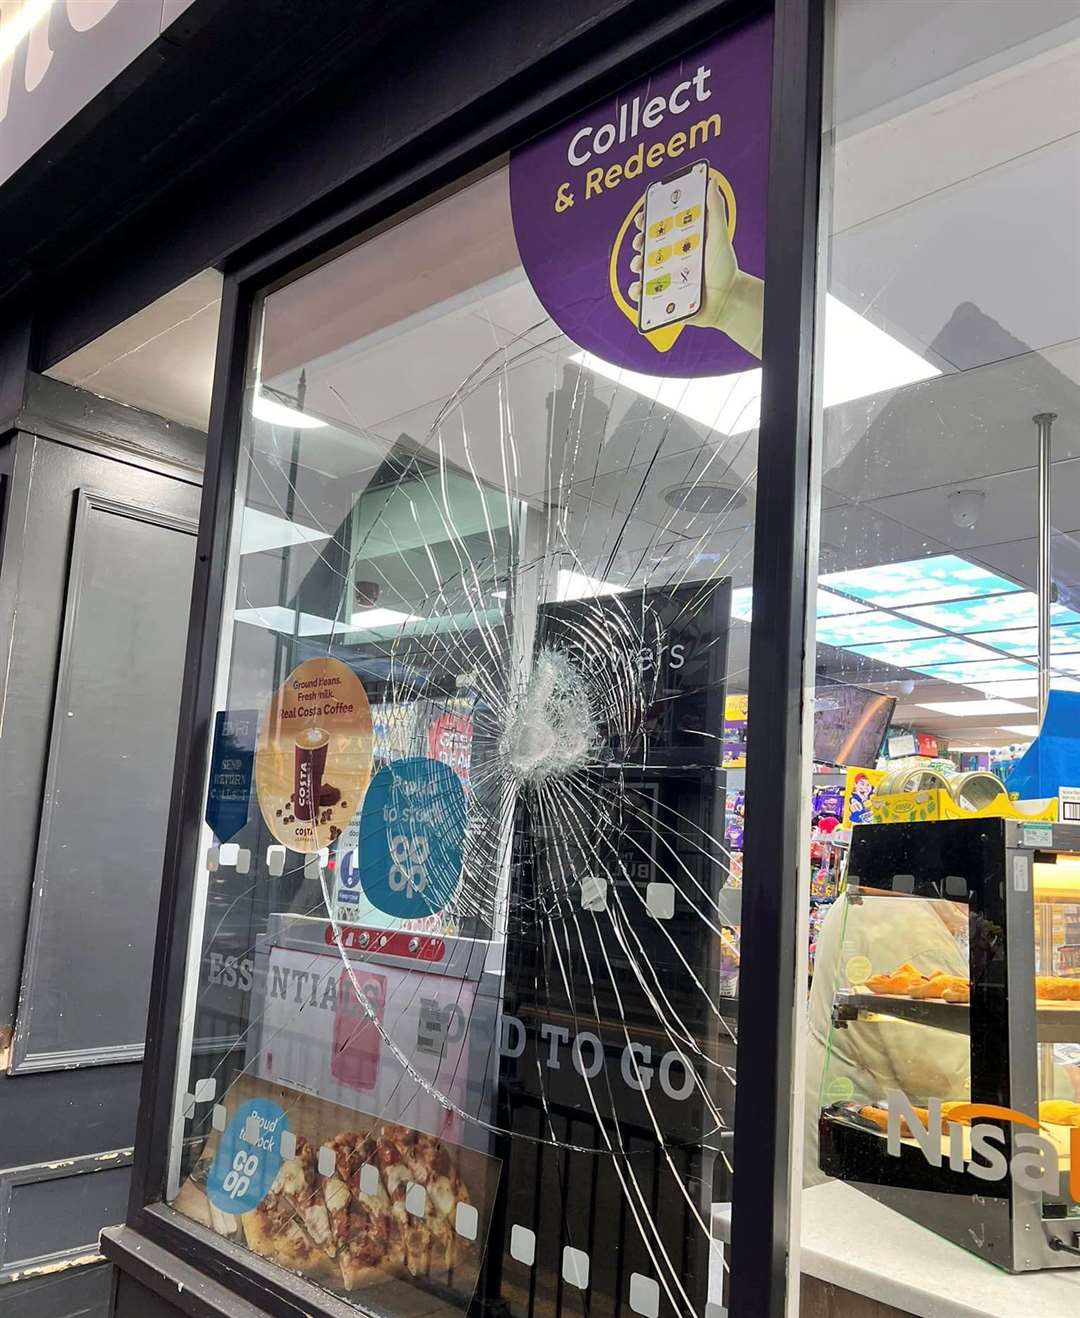 Vandals were caught on CCTV smashing the window of Nisa Local in Newigton